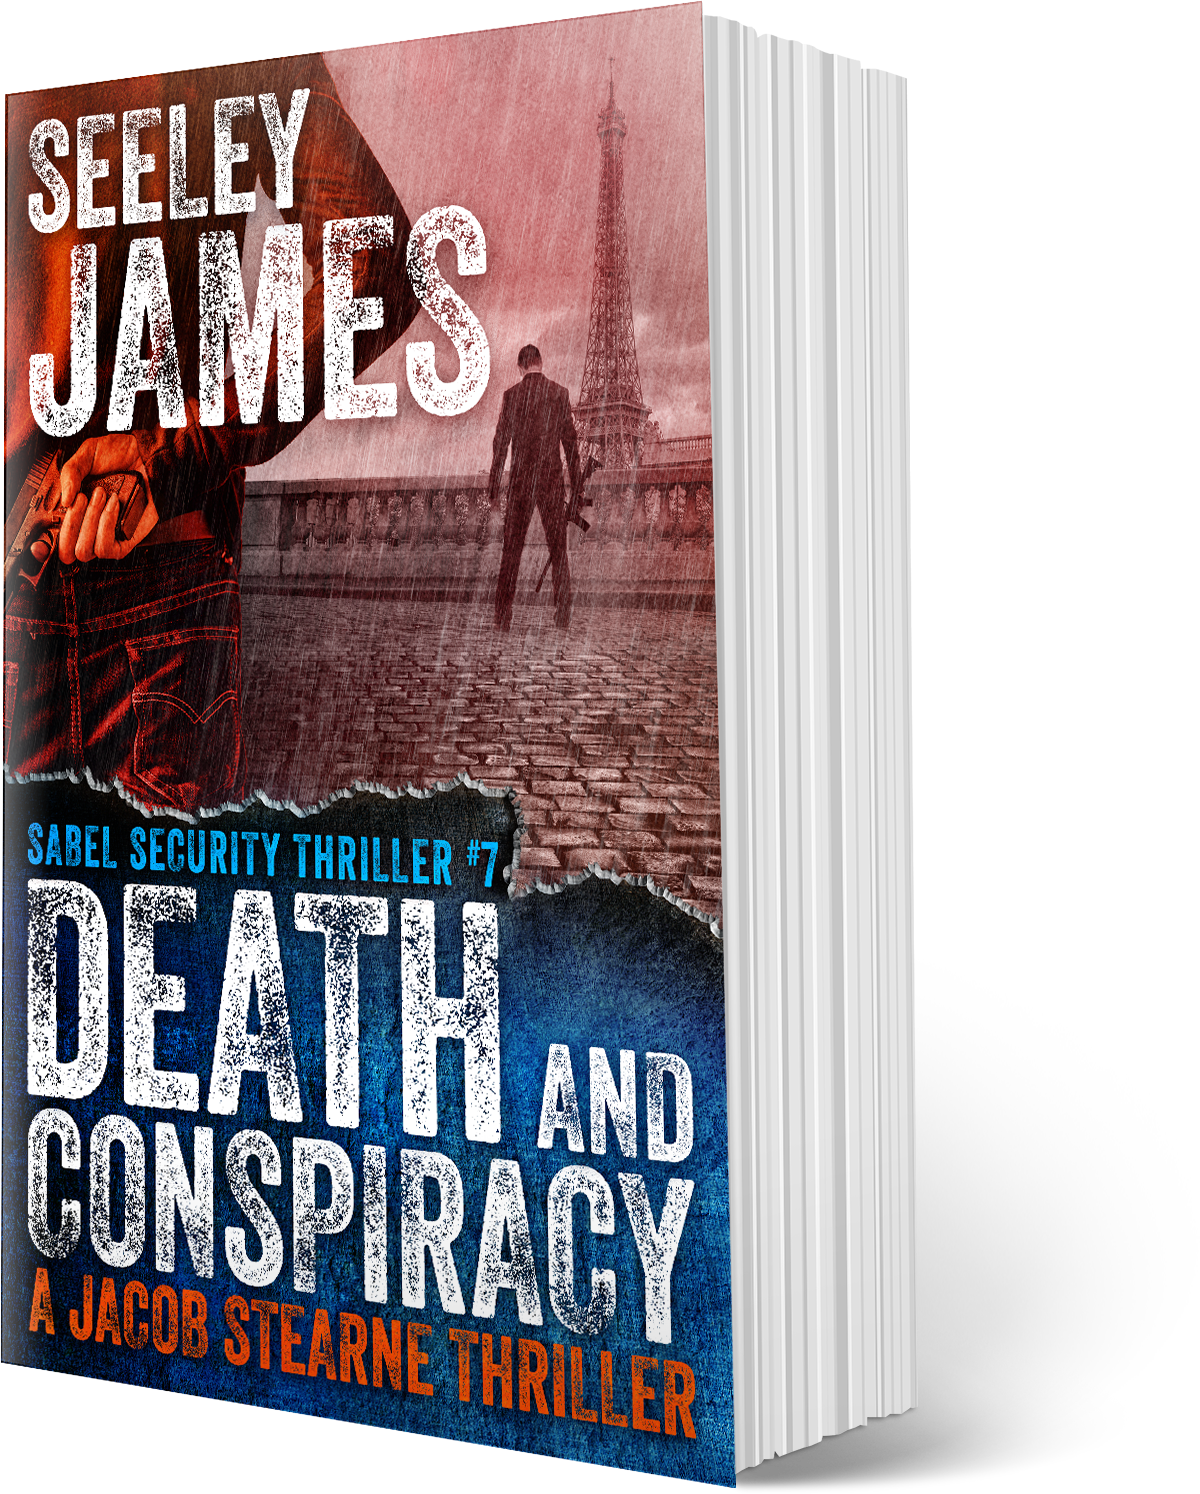 Death and Conspiracy: A Jacob Stearne Thriller - Softcover